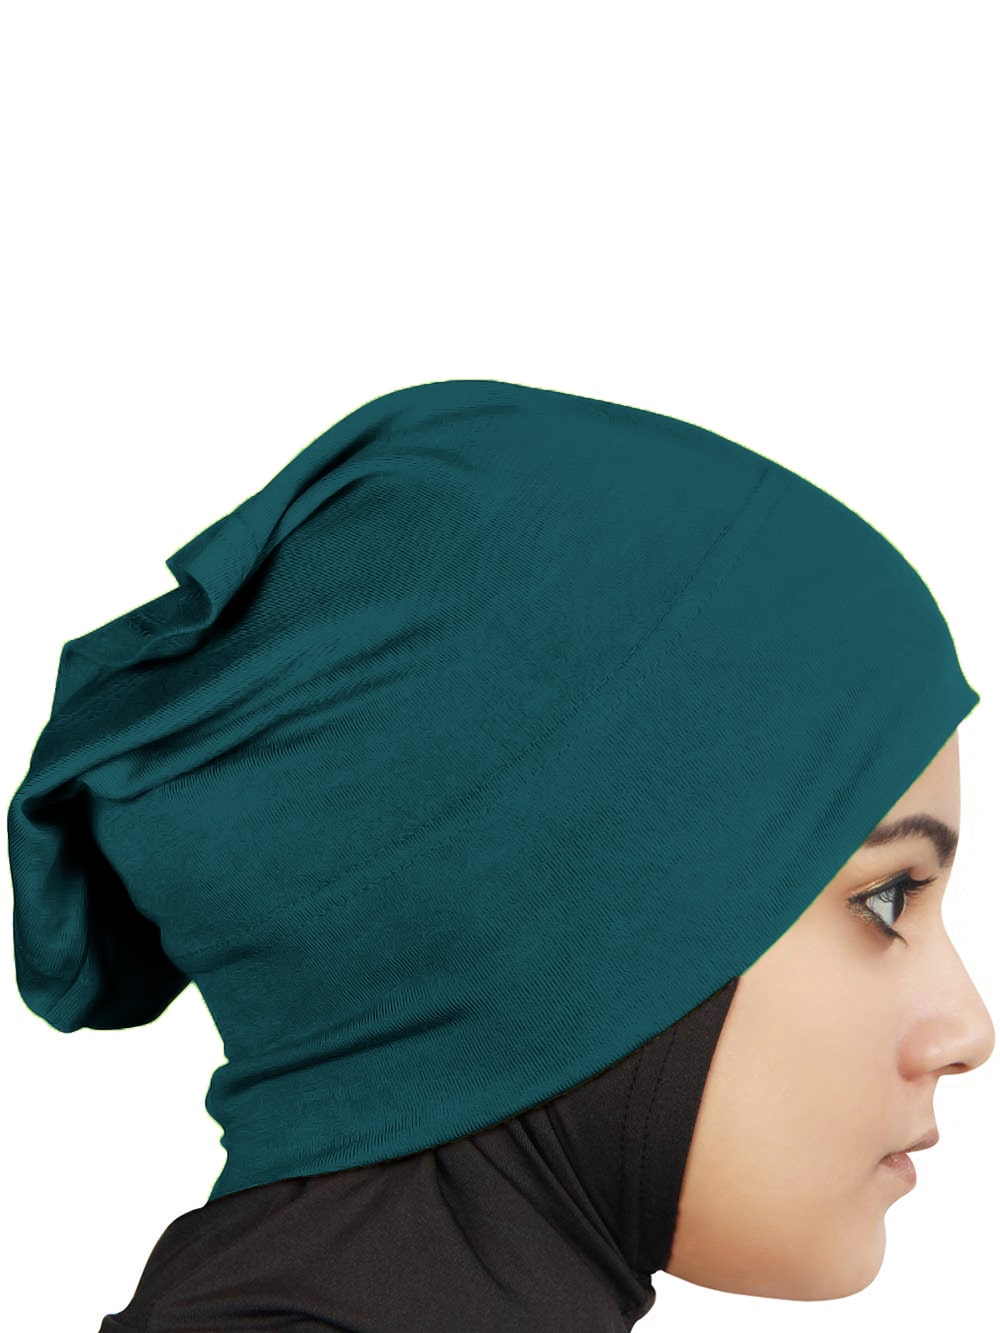 Two Piece Instant Teal Viscose Jersey Hijab